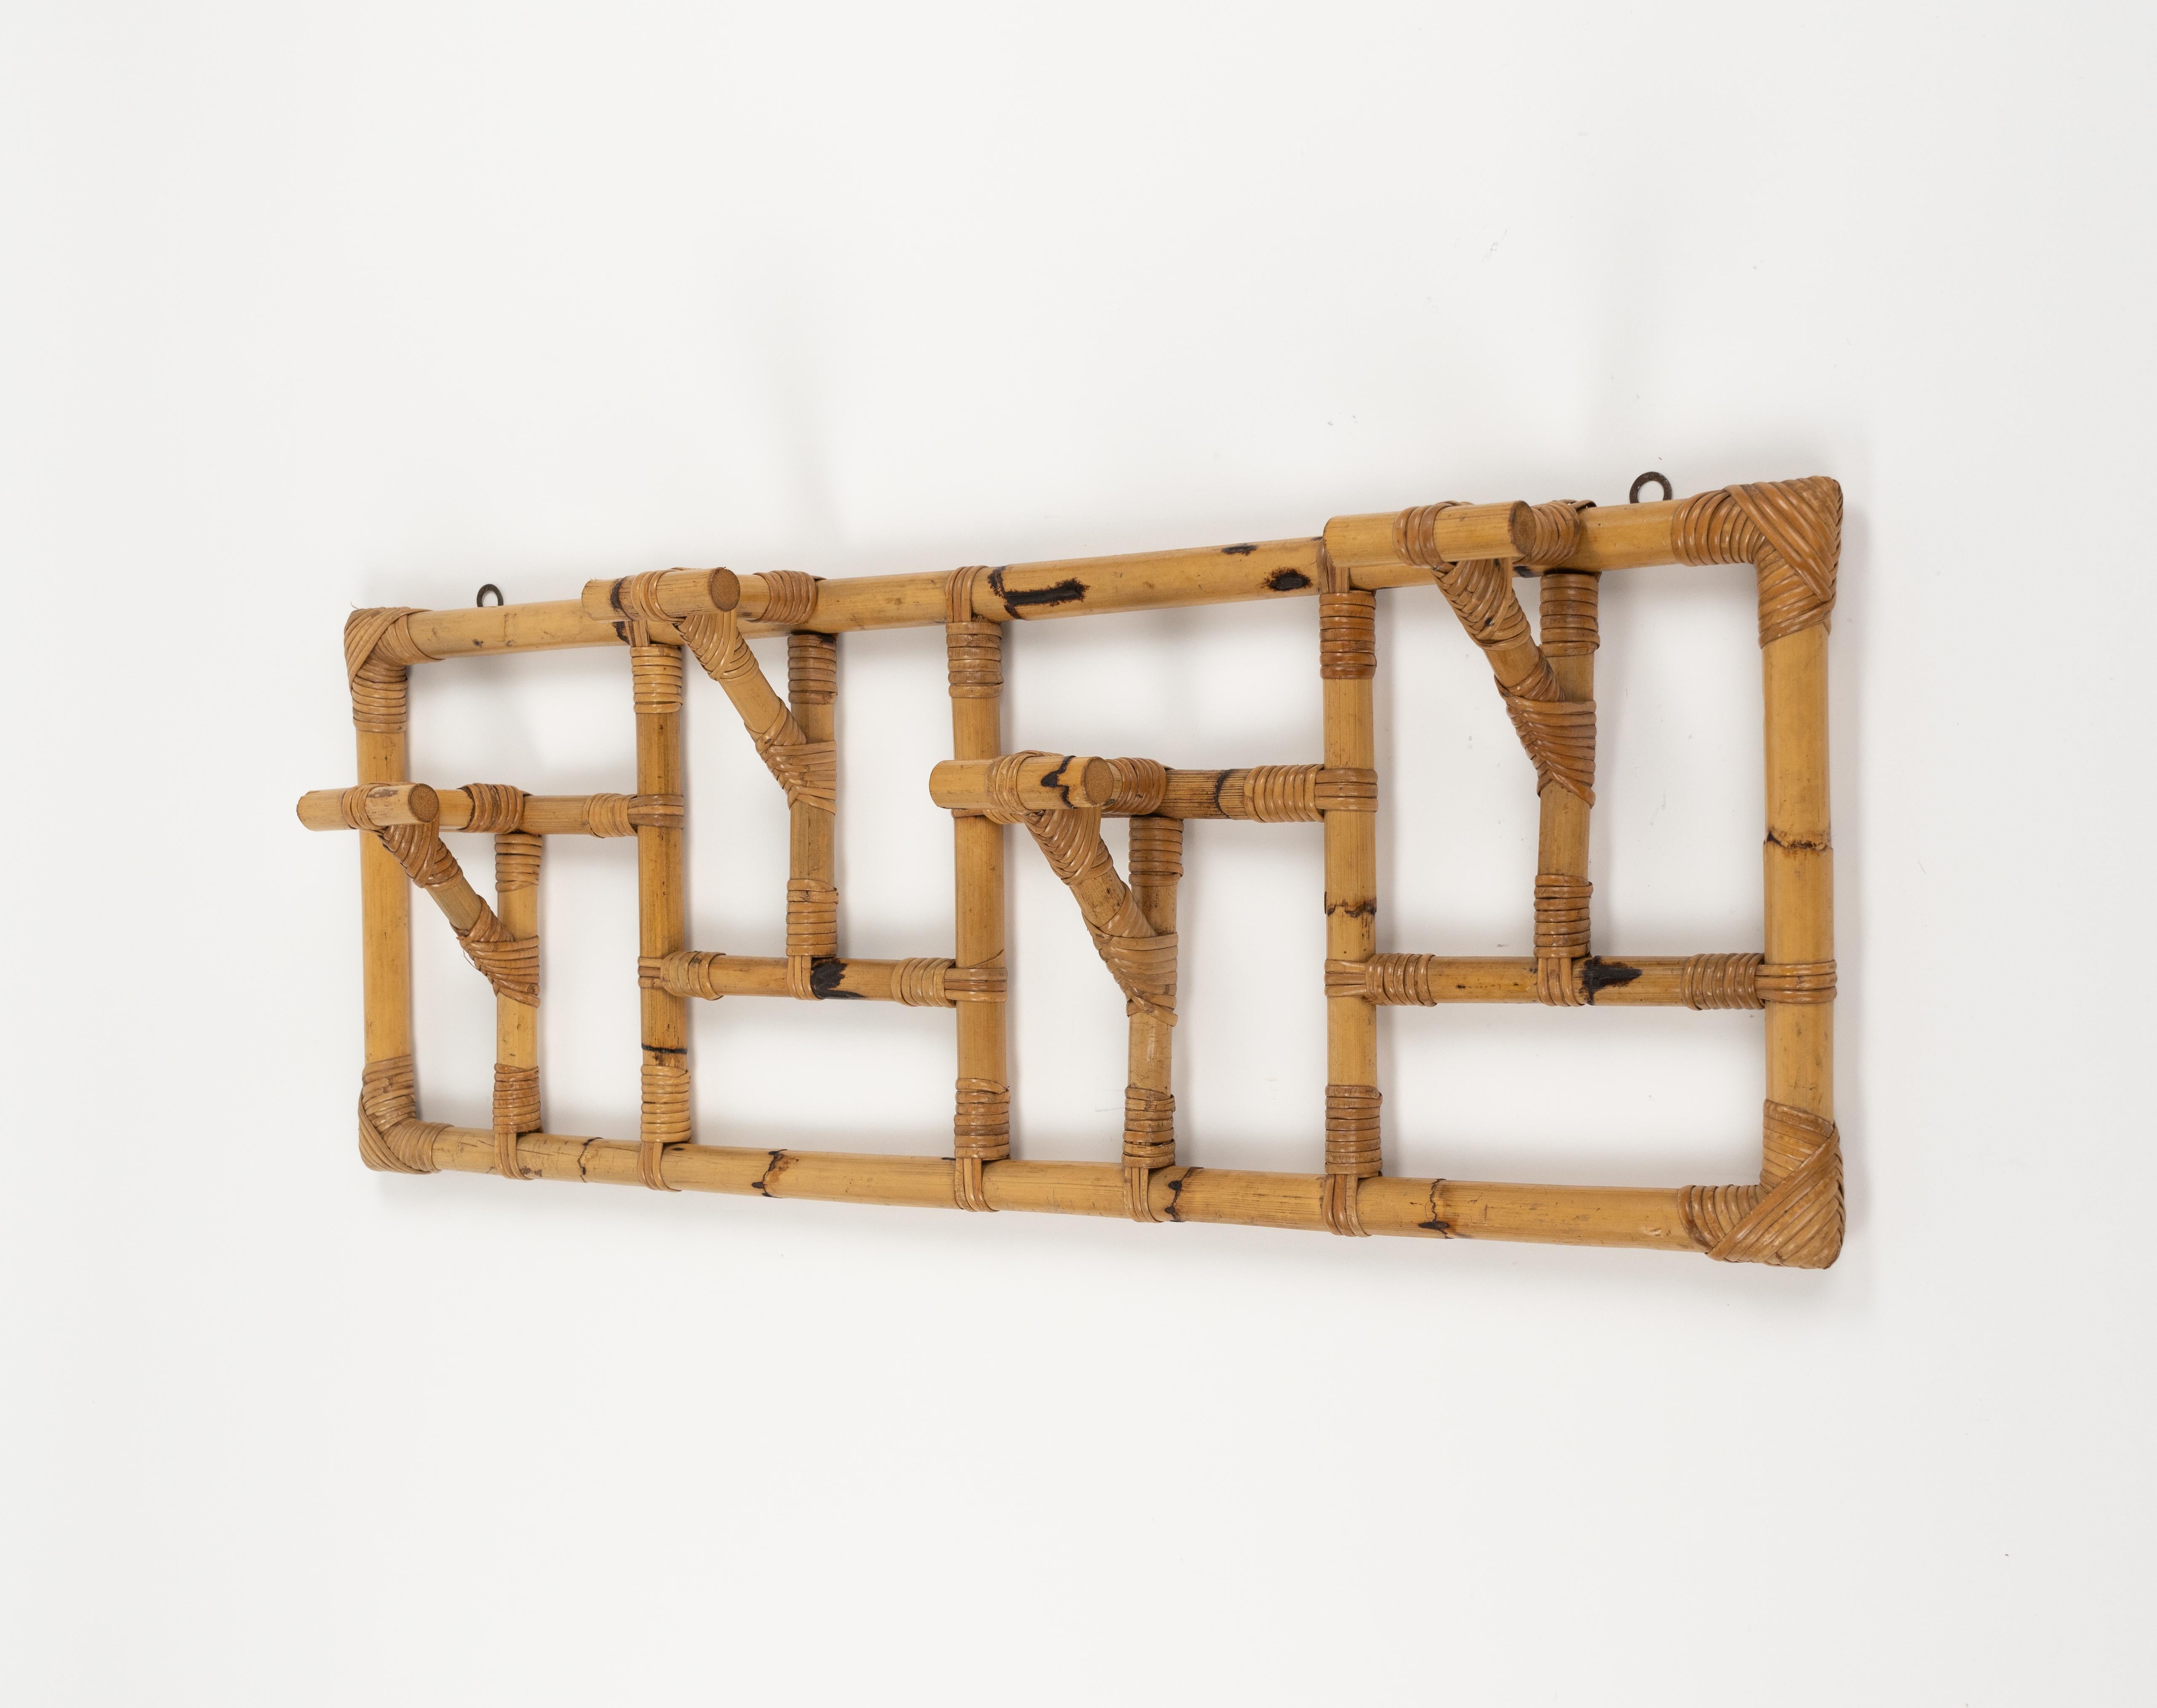 Late 20th Century Midcentury Wall Coat Rack in Bamboo and Rattan Vivai Del Sud Style, Italy 1970s